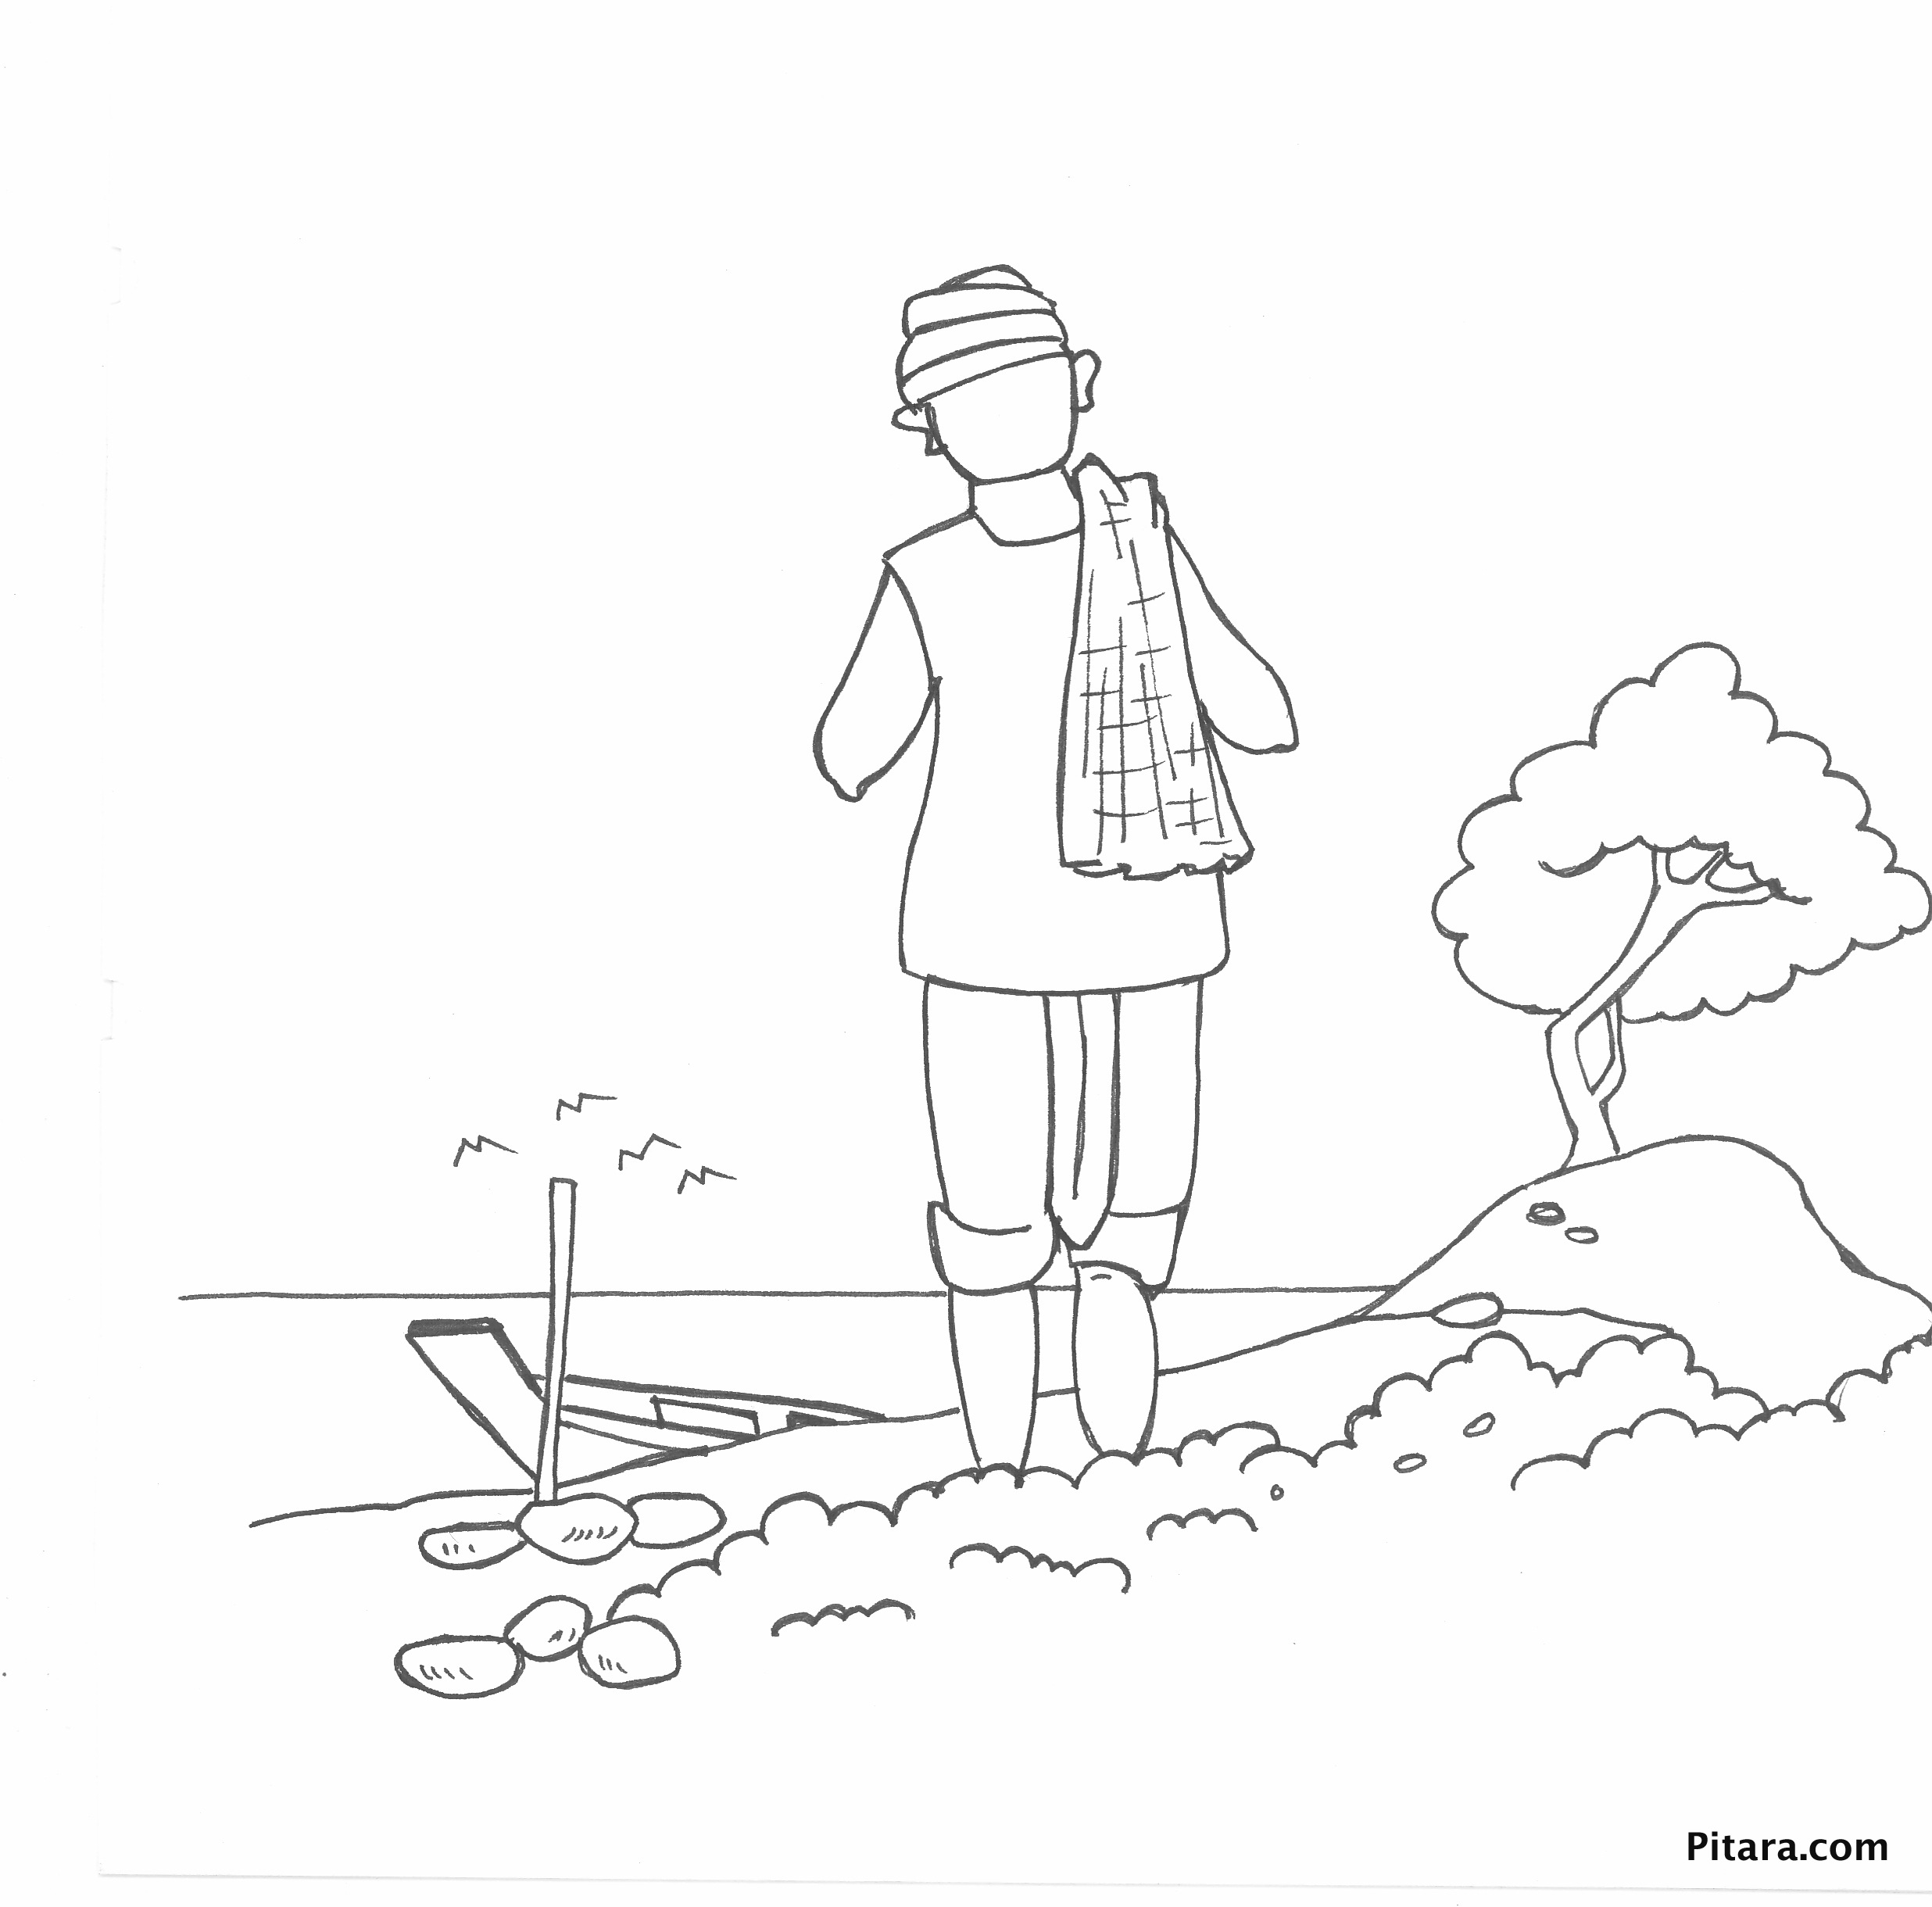 Indian farmer by the river – Coloring page – Pitara Kids 